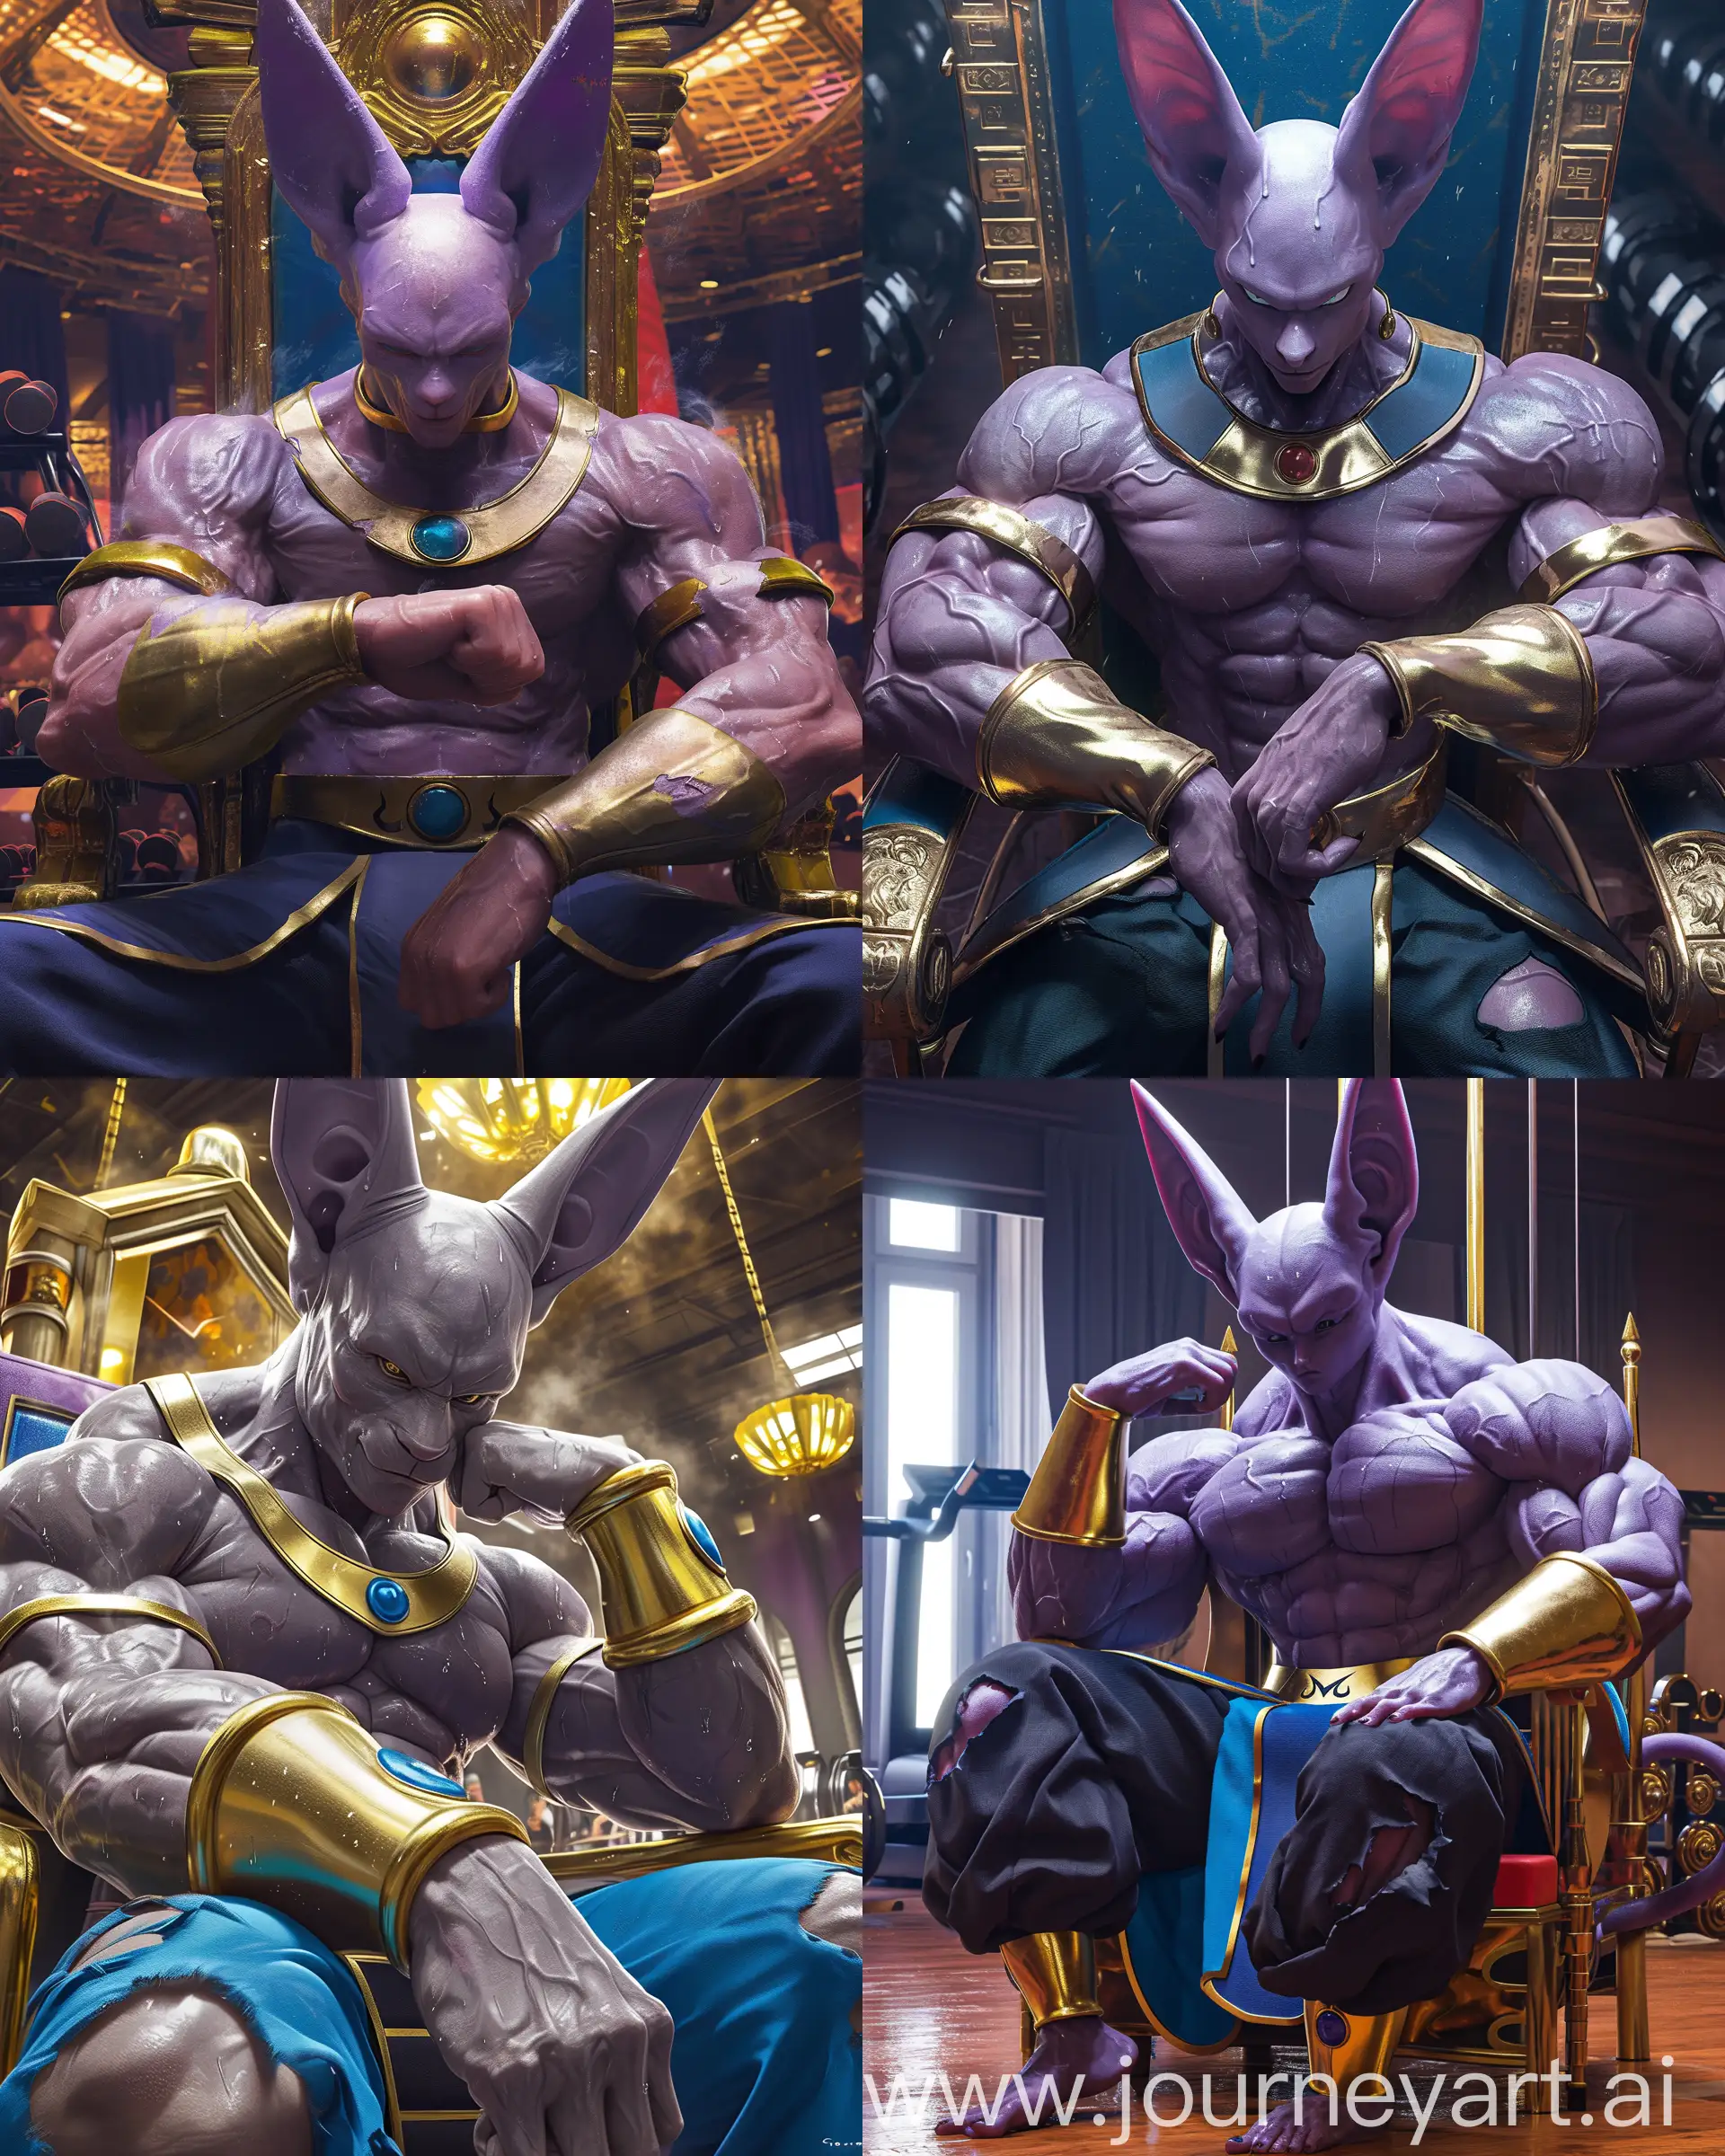 Lord-Beerus-Dragon-Ball-Worlds-Mighty-Gym-Sovereign